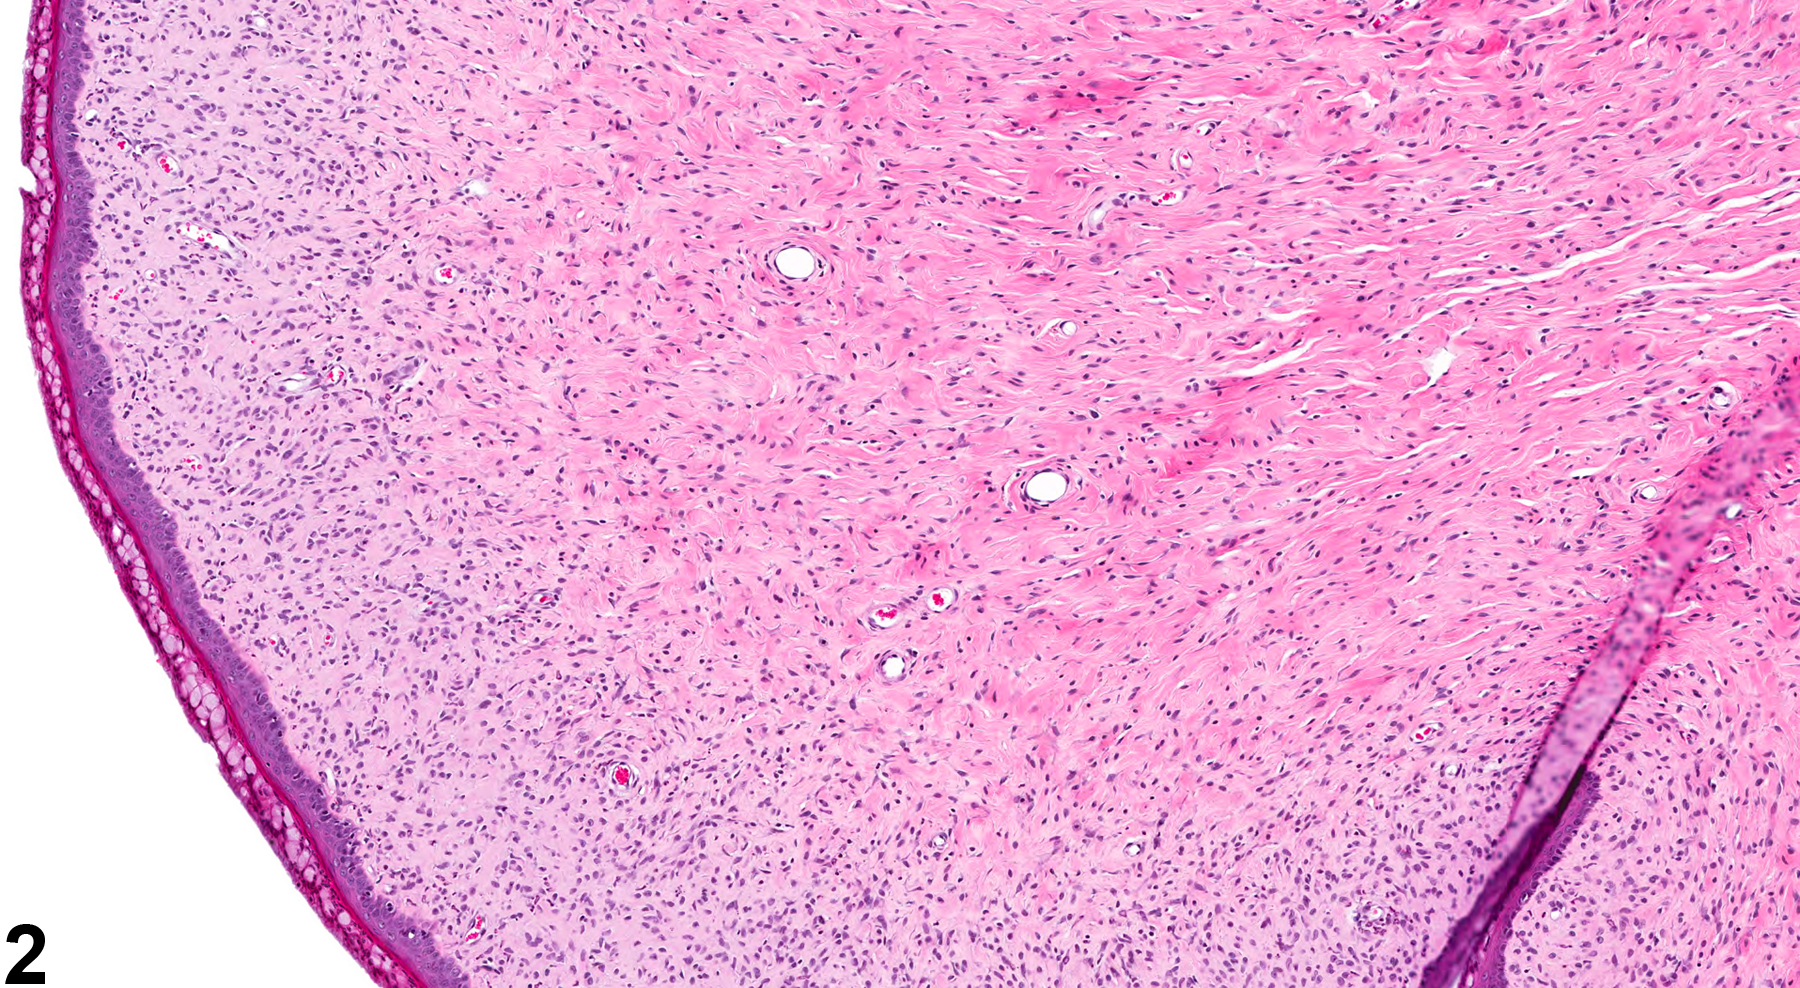 Image of hyperplasia, stromal in the vagina from a female F344/N rat in a chronic study